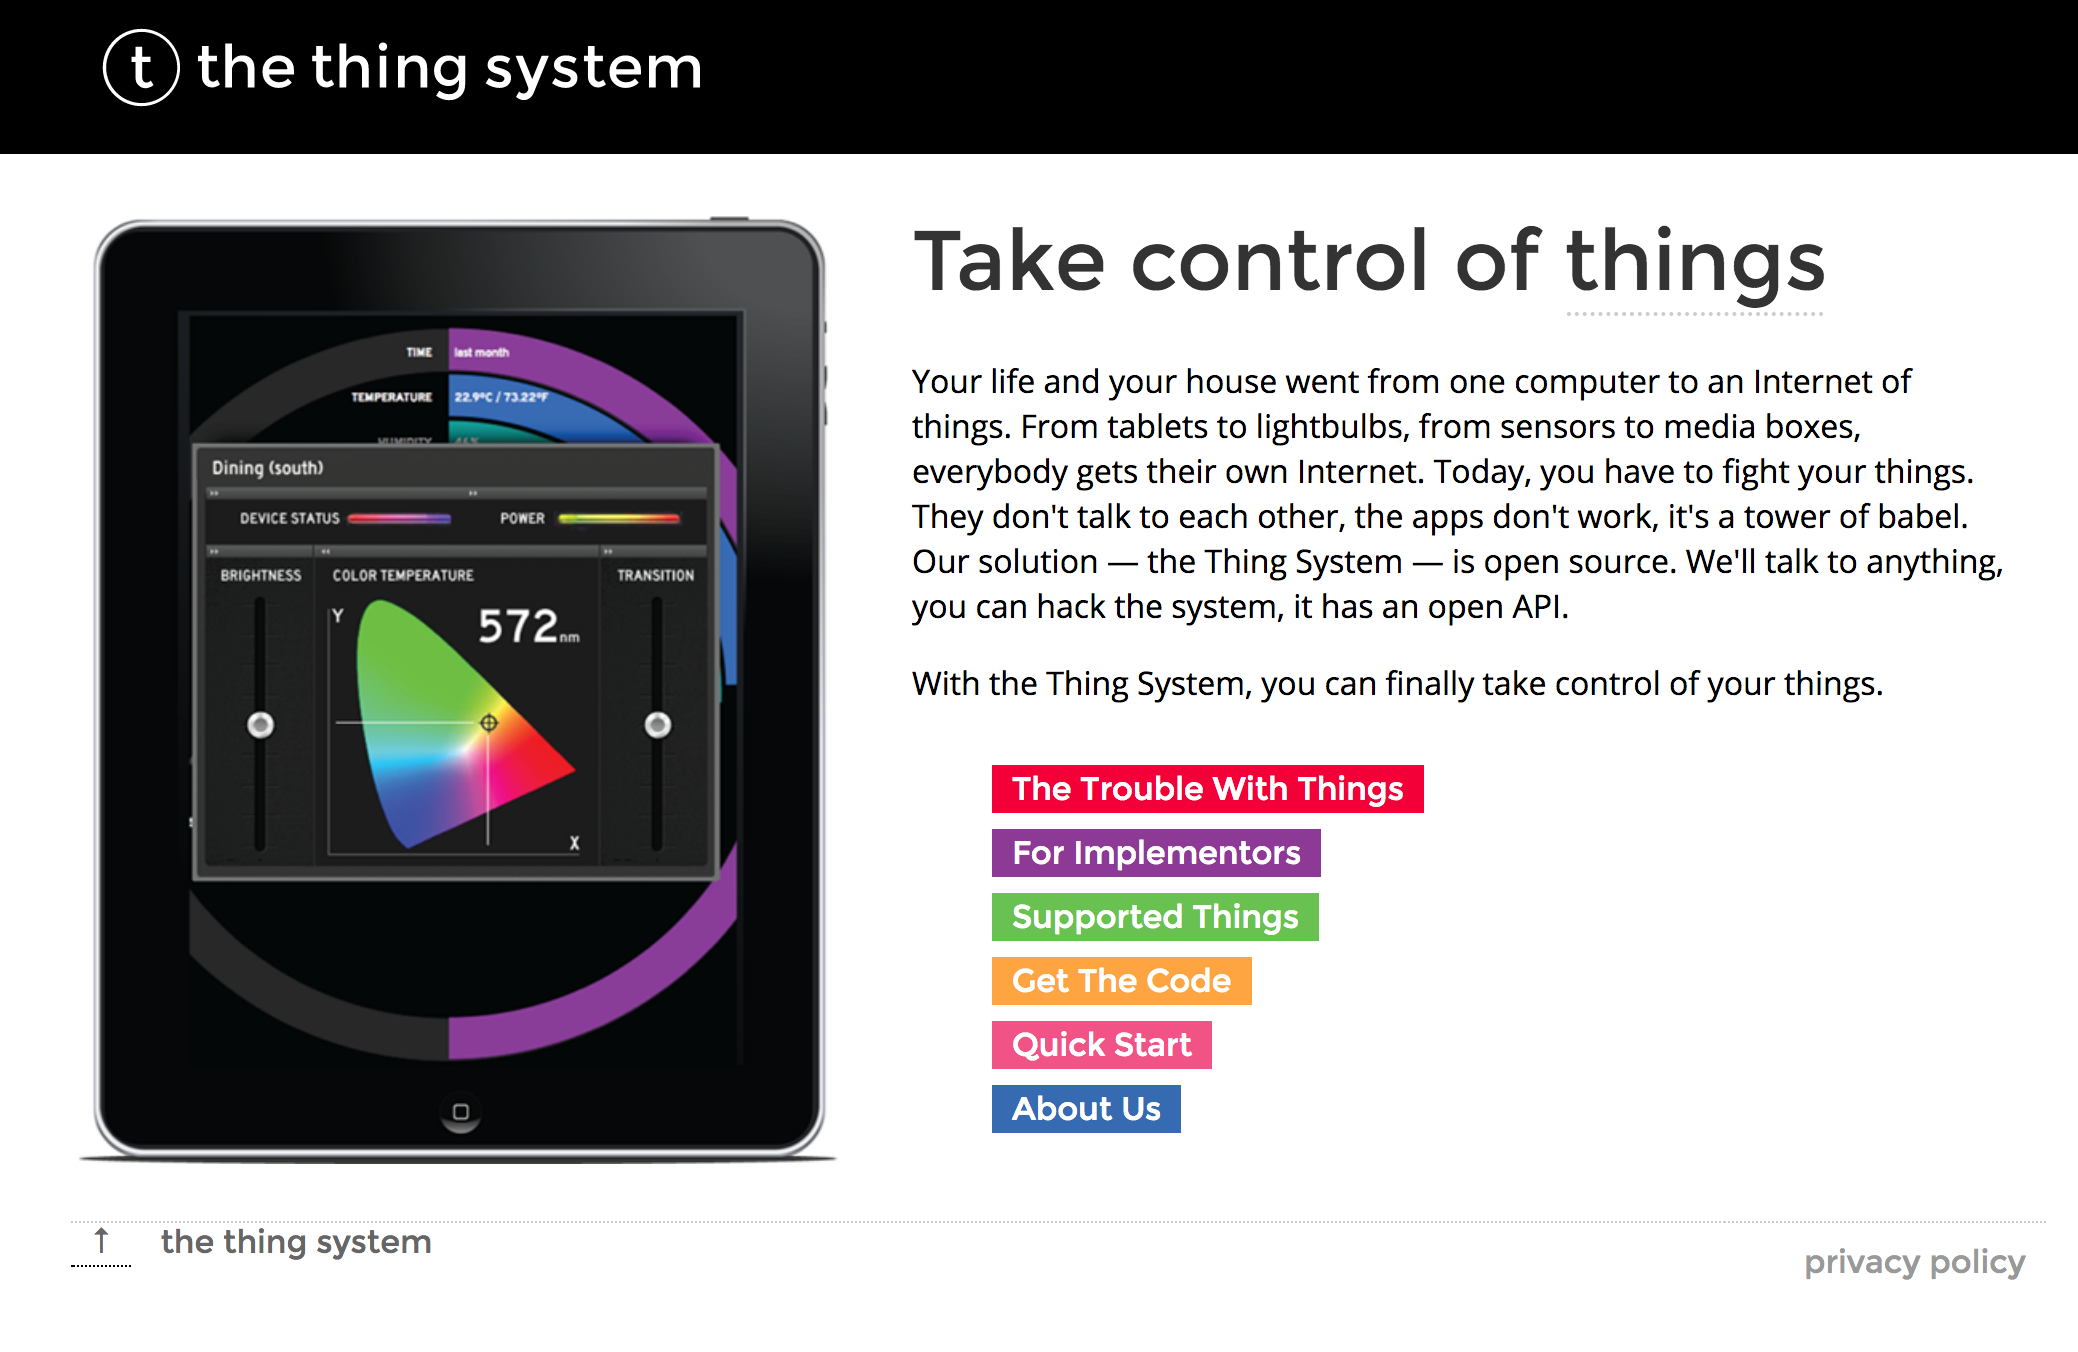 The Thing System